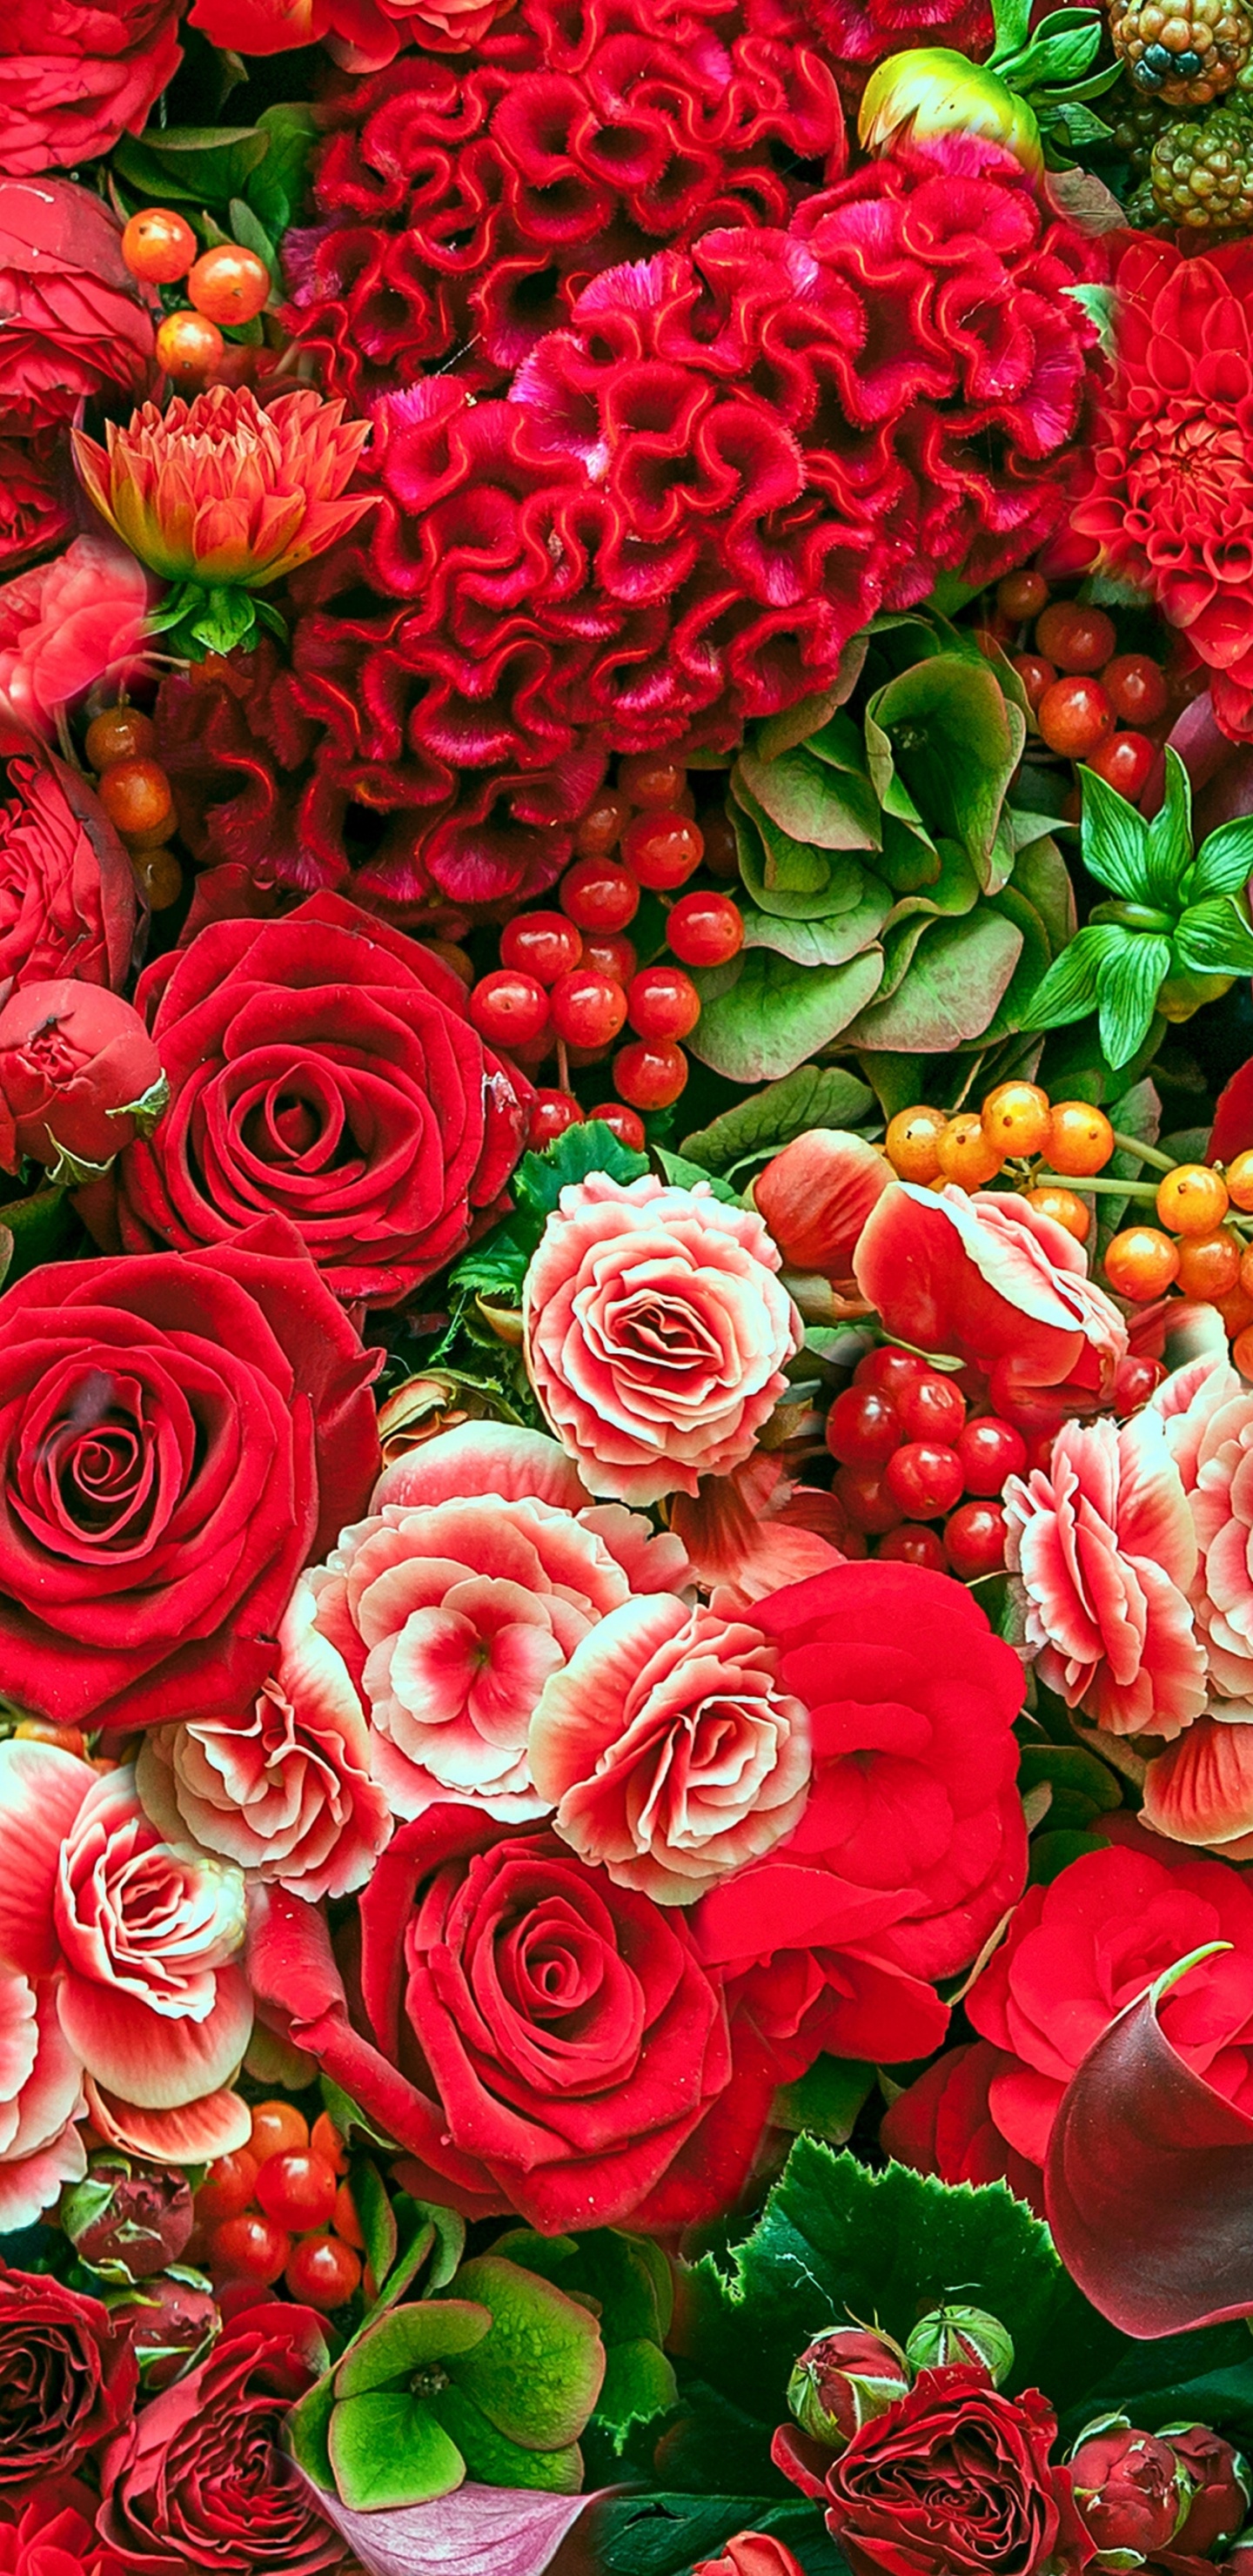 Red Roses With Green Leaves. Wallpaper in 1440x2960 Resolution